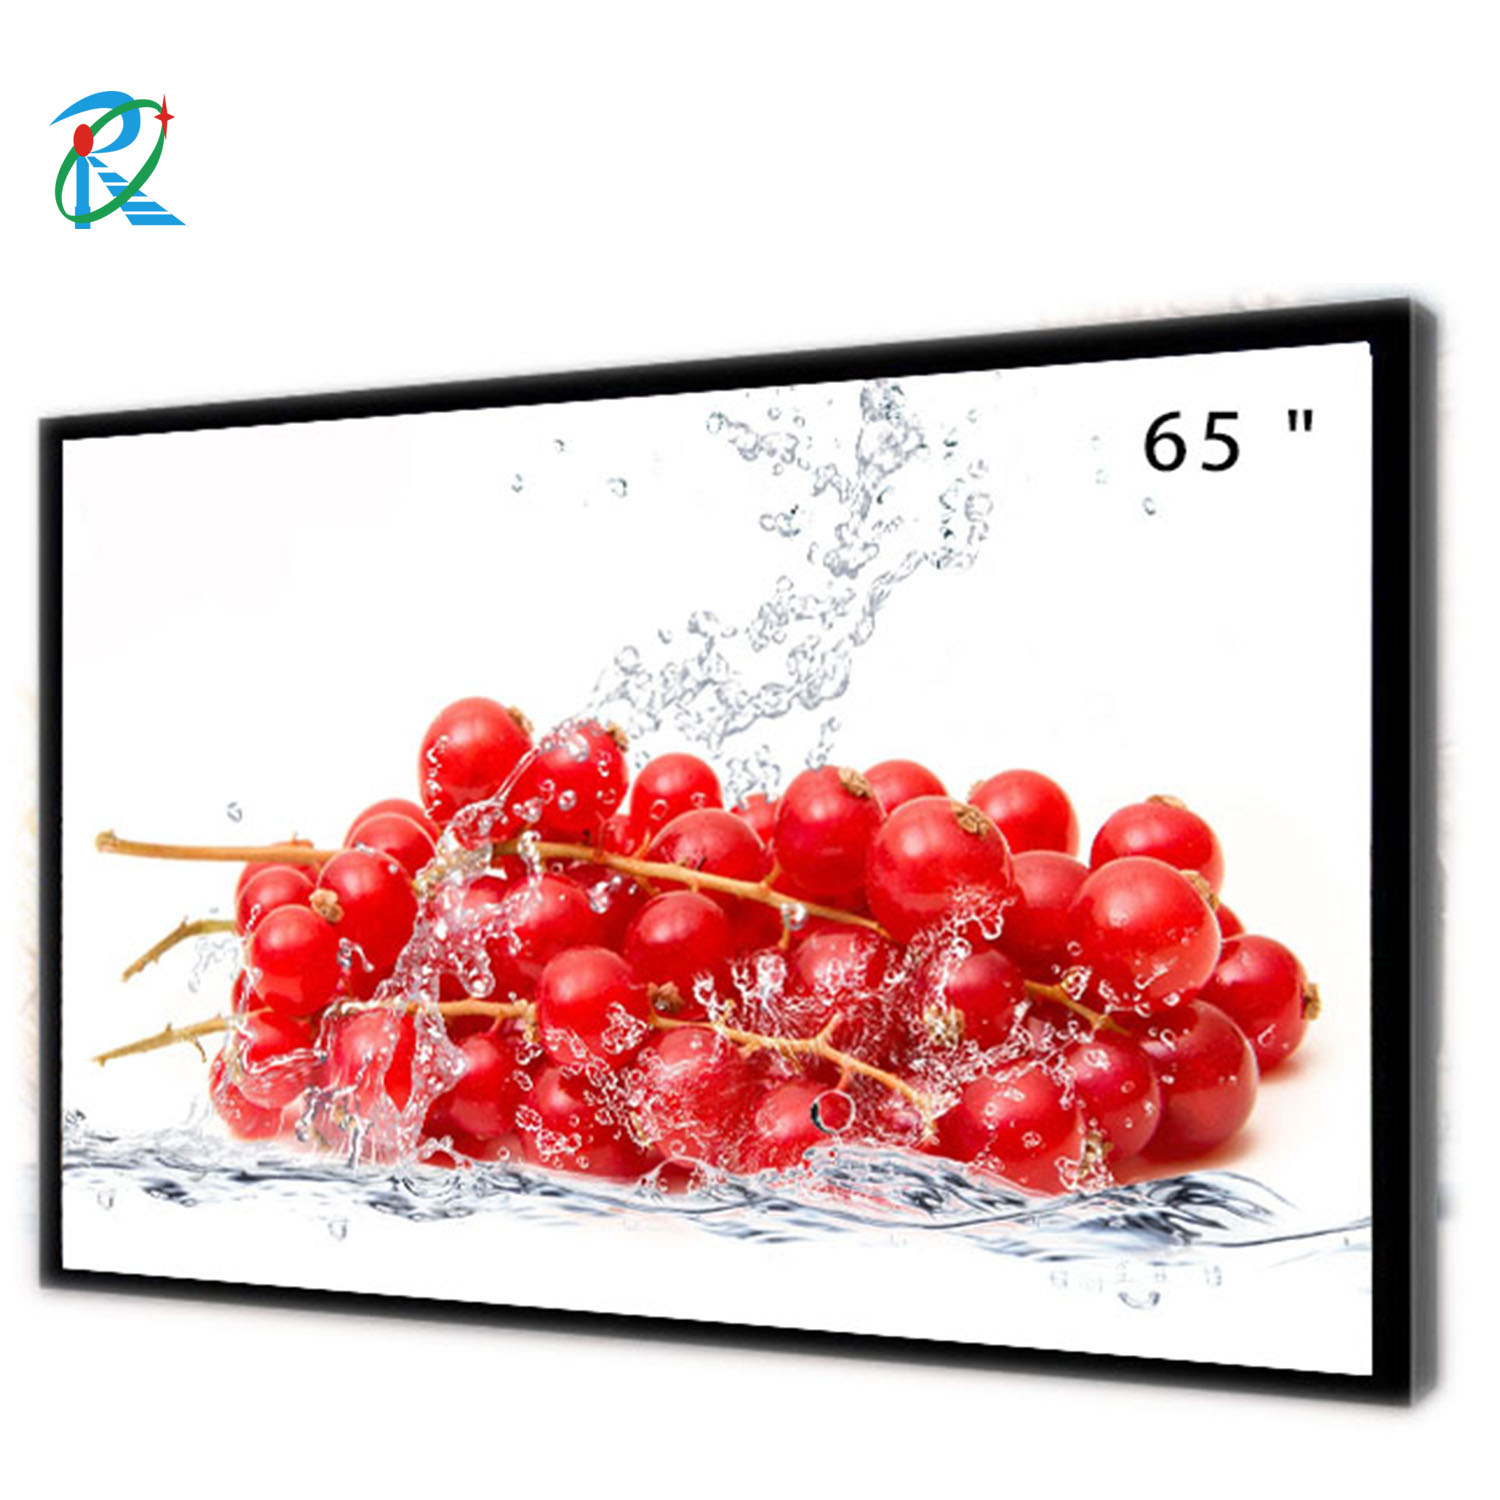 65 inch outdoor high brightness sunlight readable LCD display